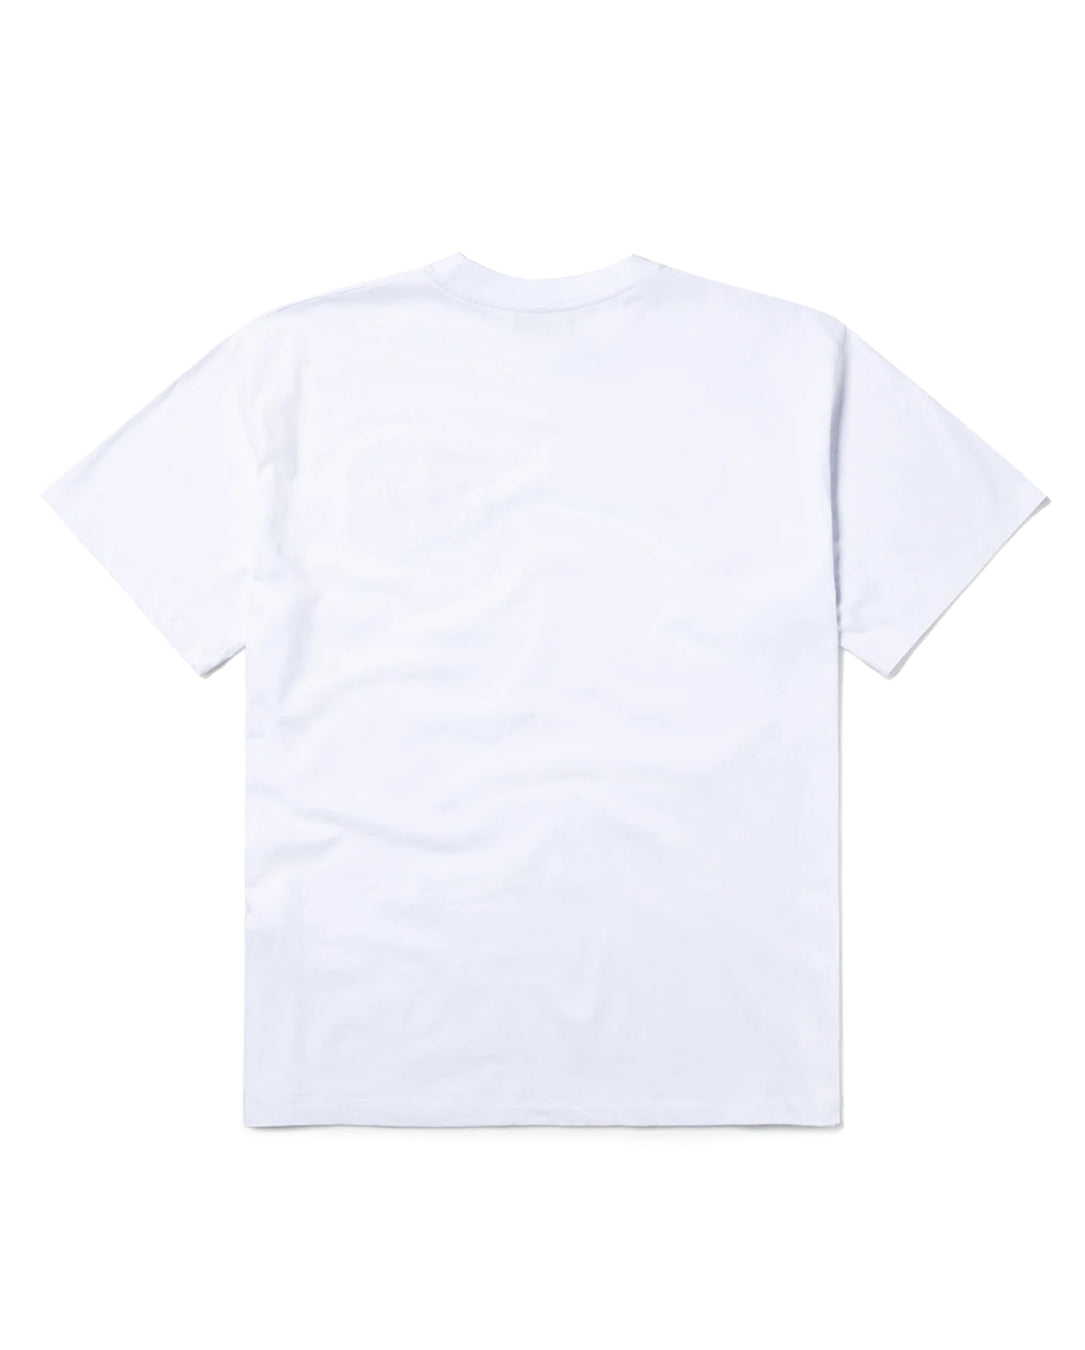 Temple SS Tee white